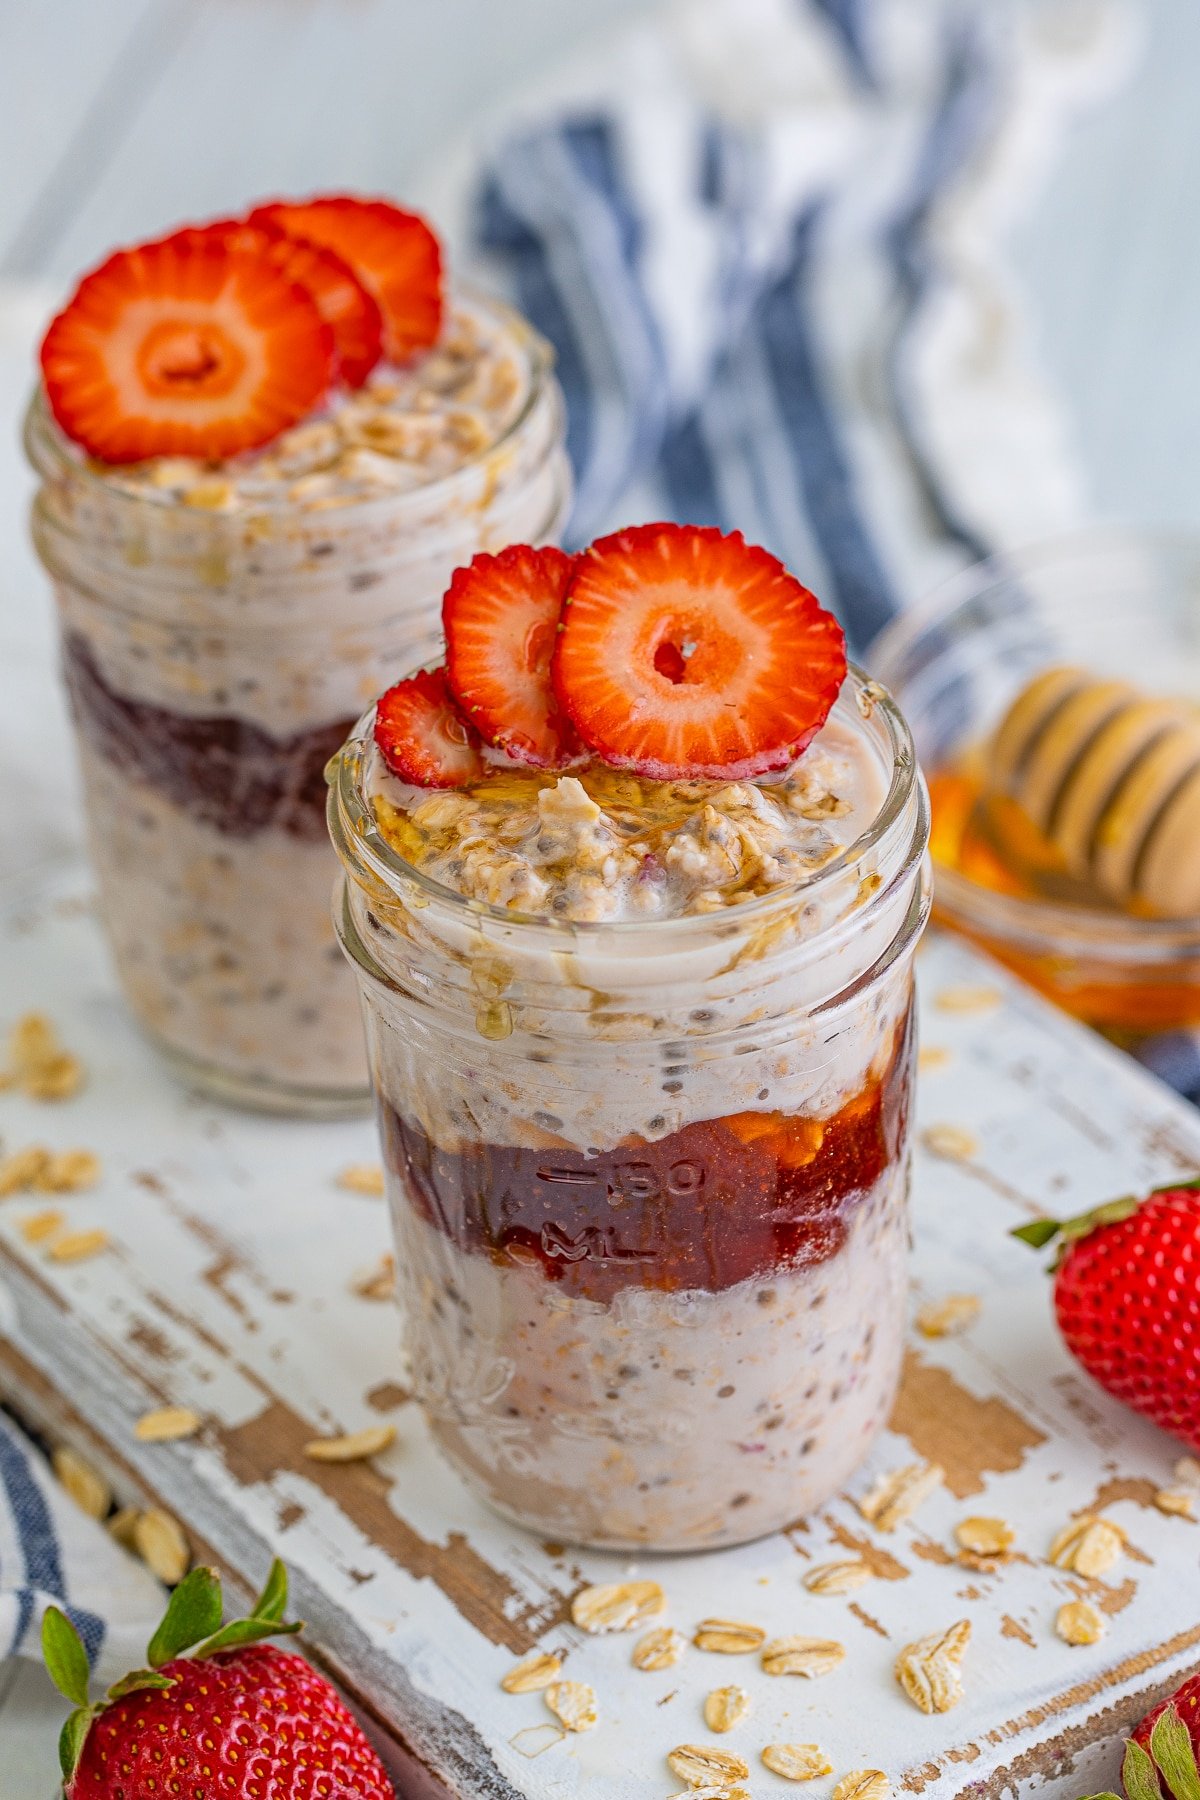 Strawberry Overnight oats shown layered in a mason jar on a white wooden serving platter, fresh strawberries, striped blue linen, and honey dipper in the background